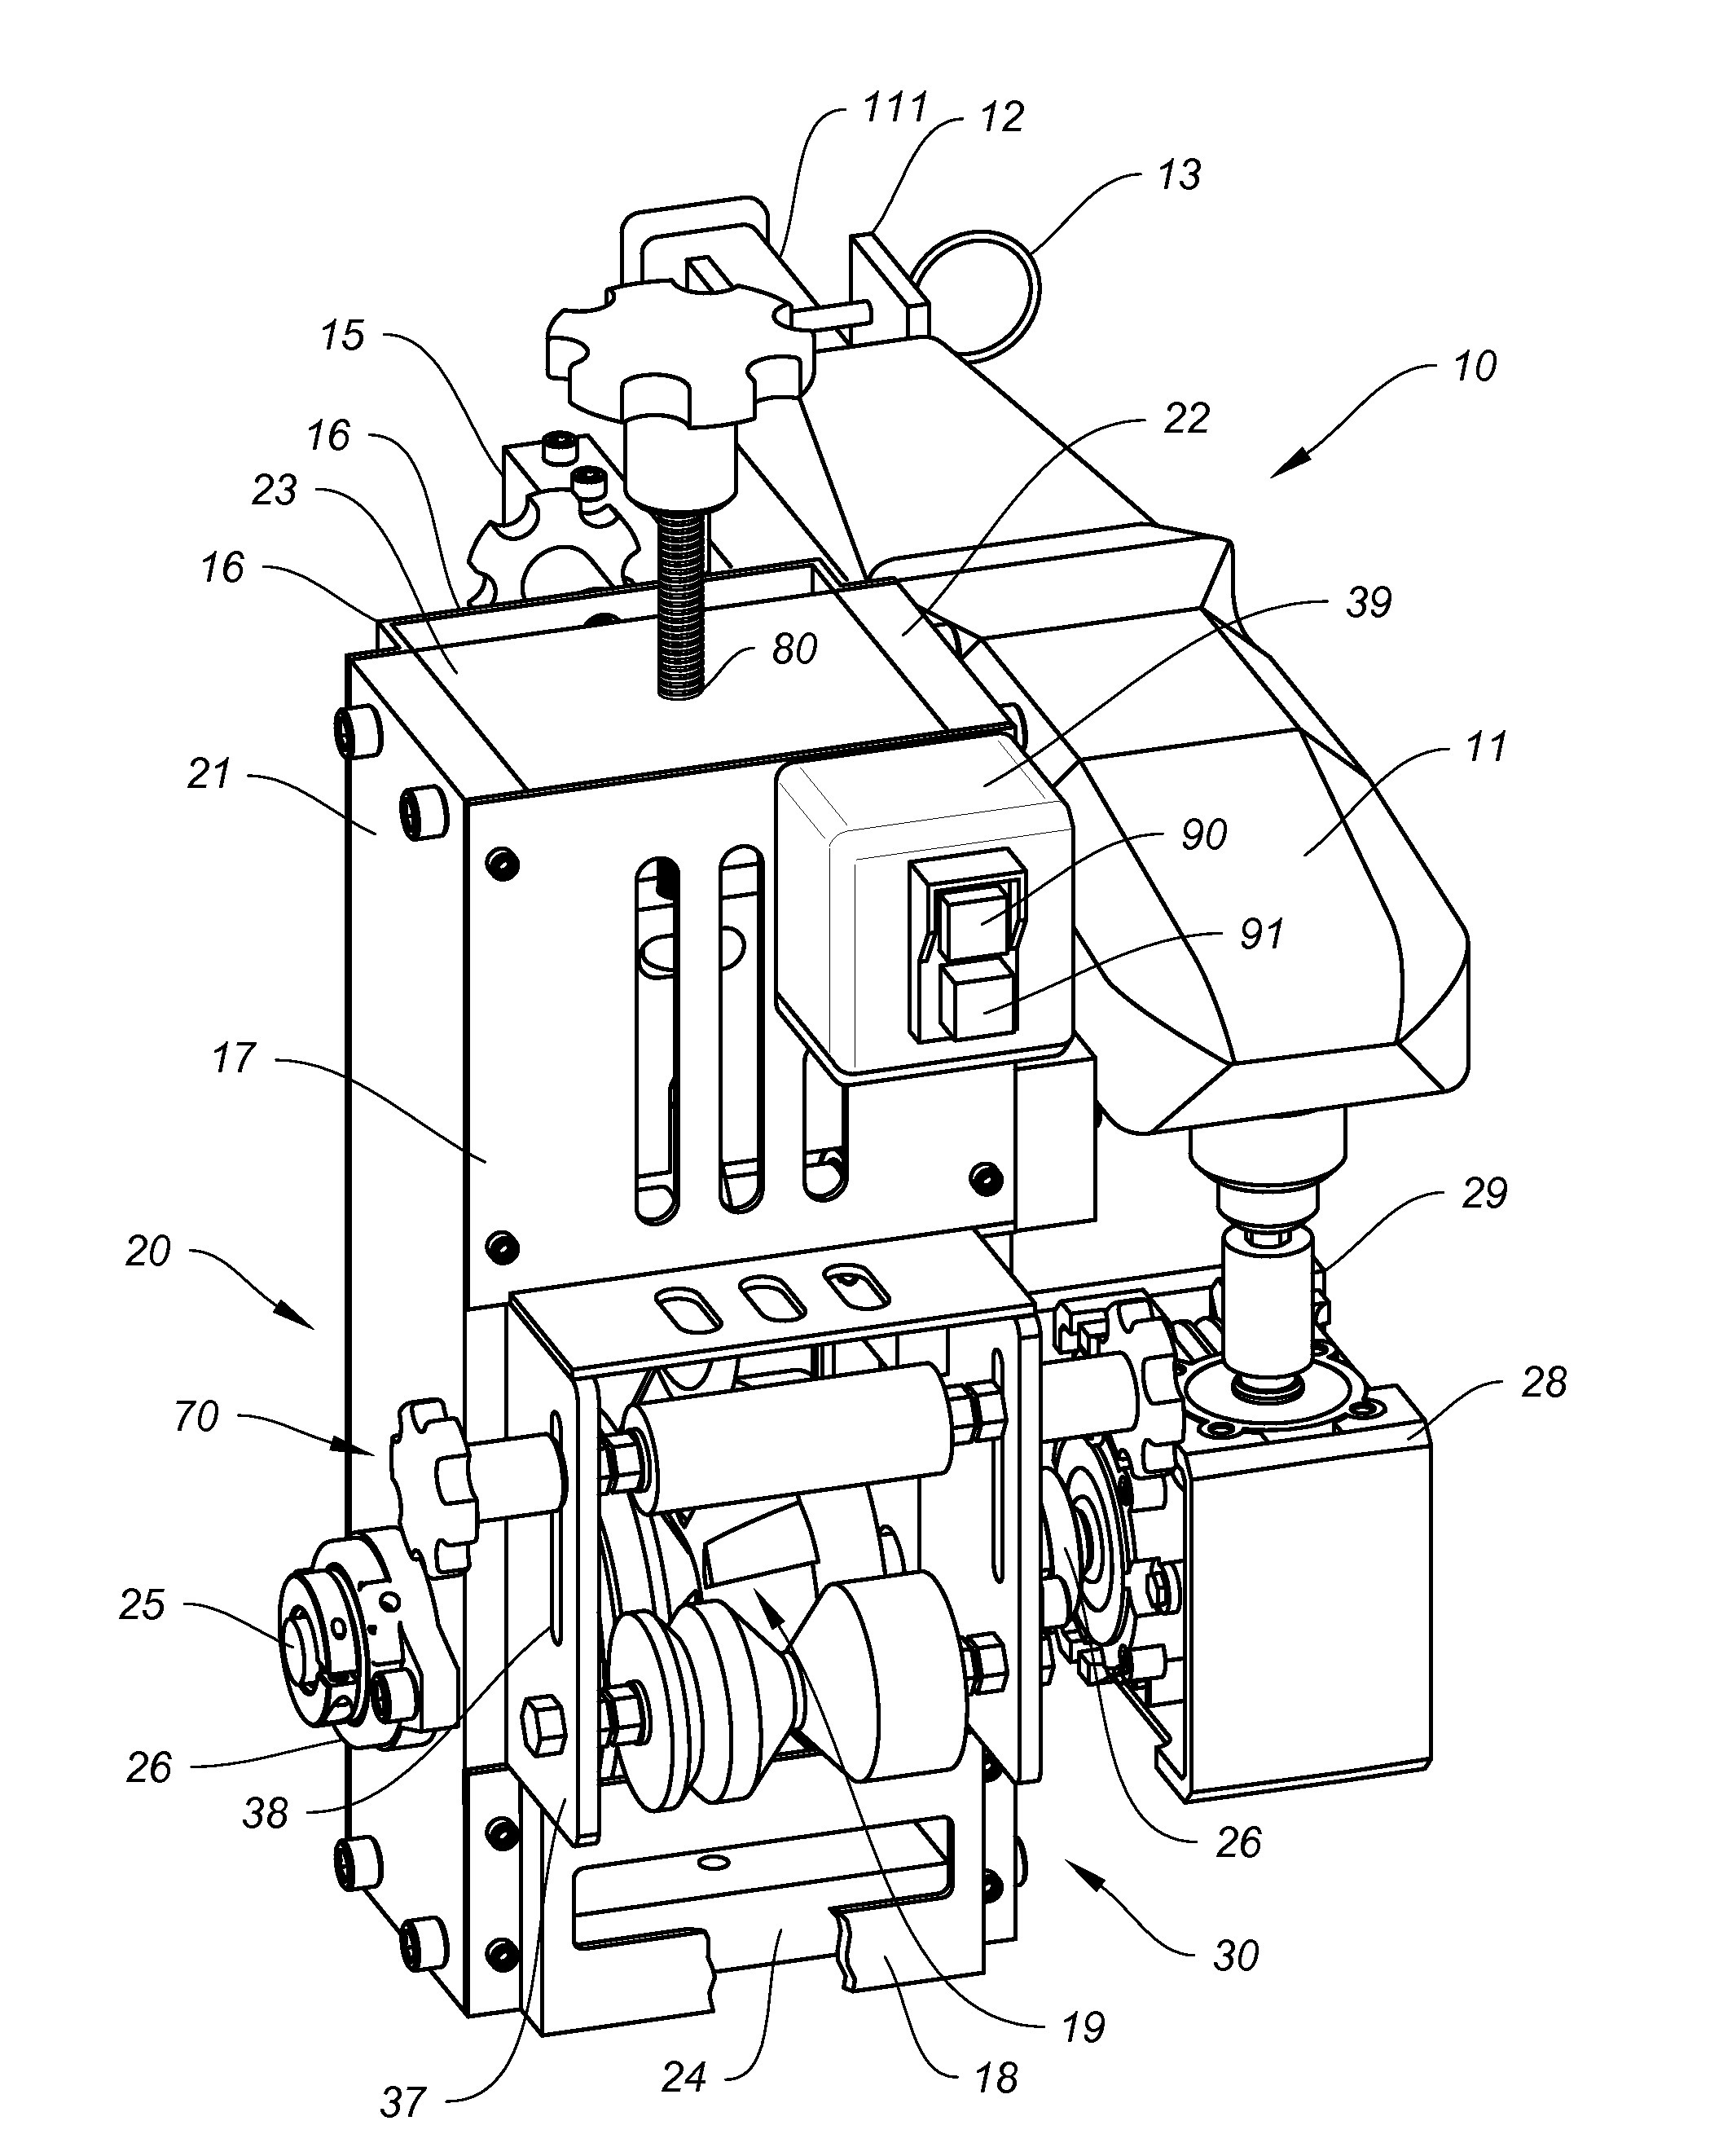 Apparatus and Method for Stripping Insulation Lengthwise fom Electrical Wires and Cables